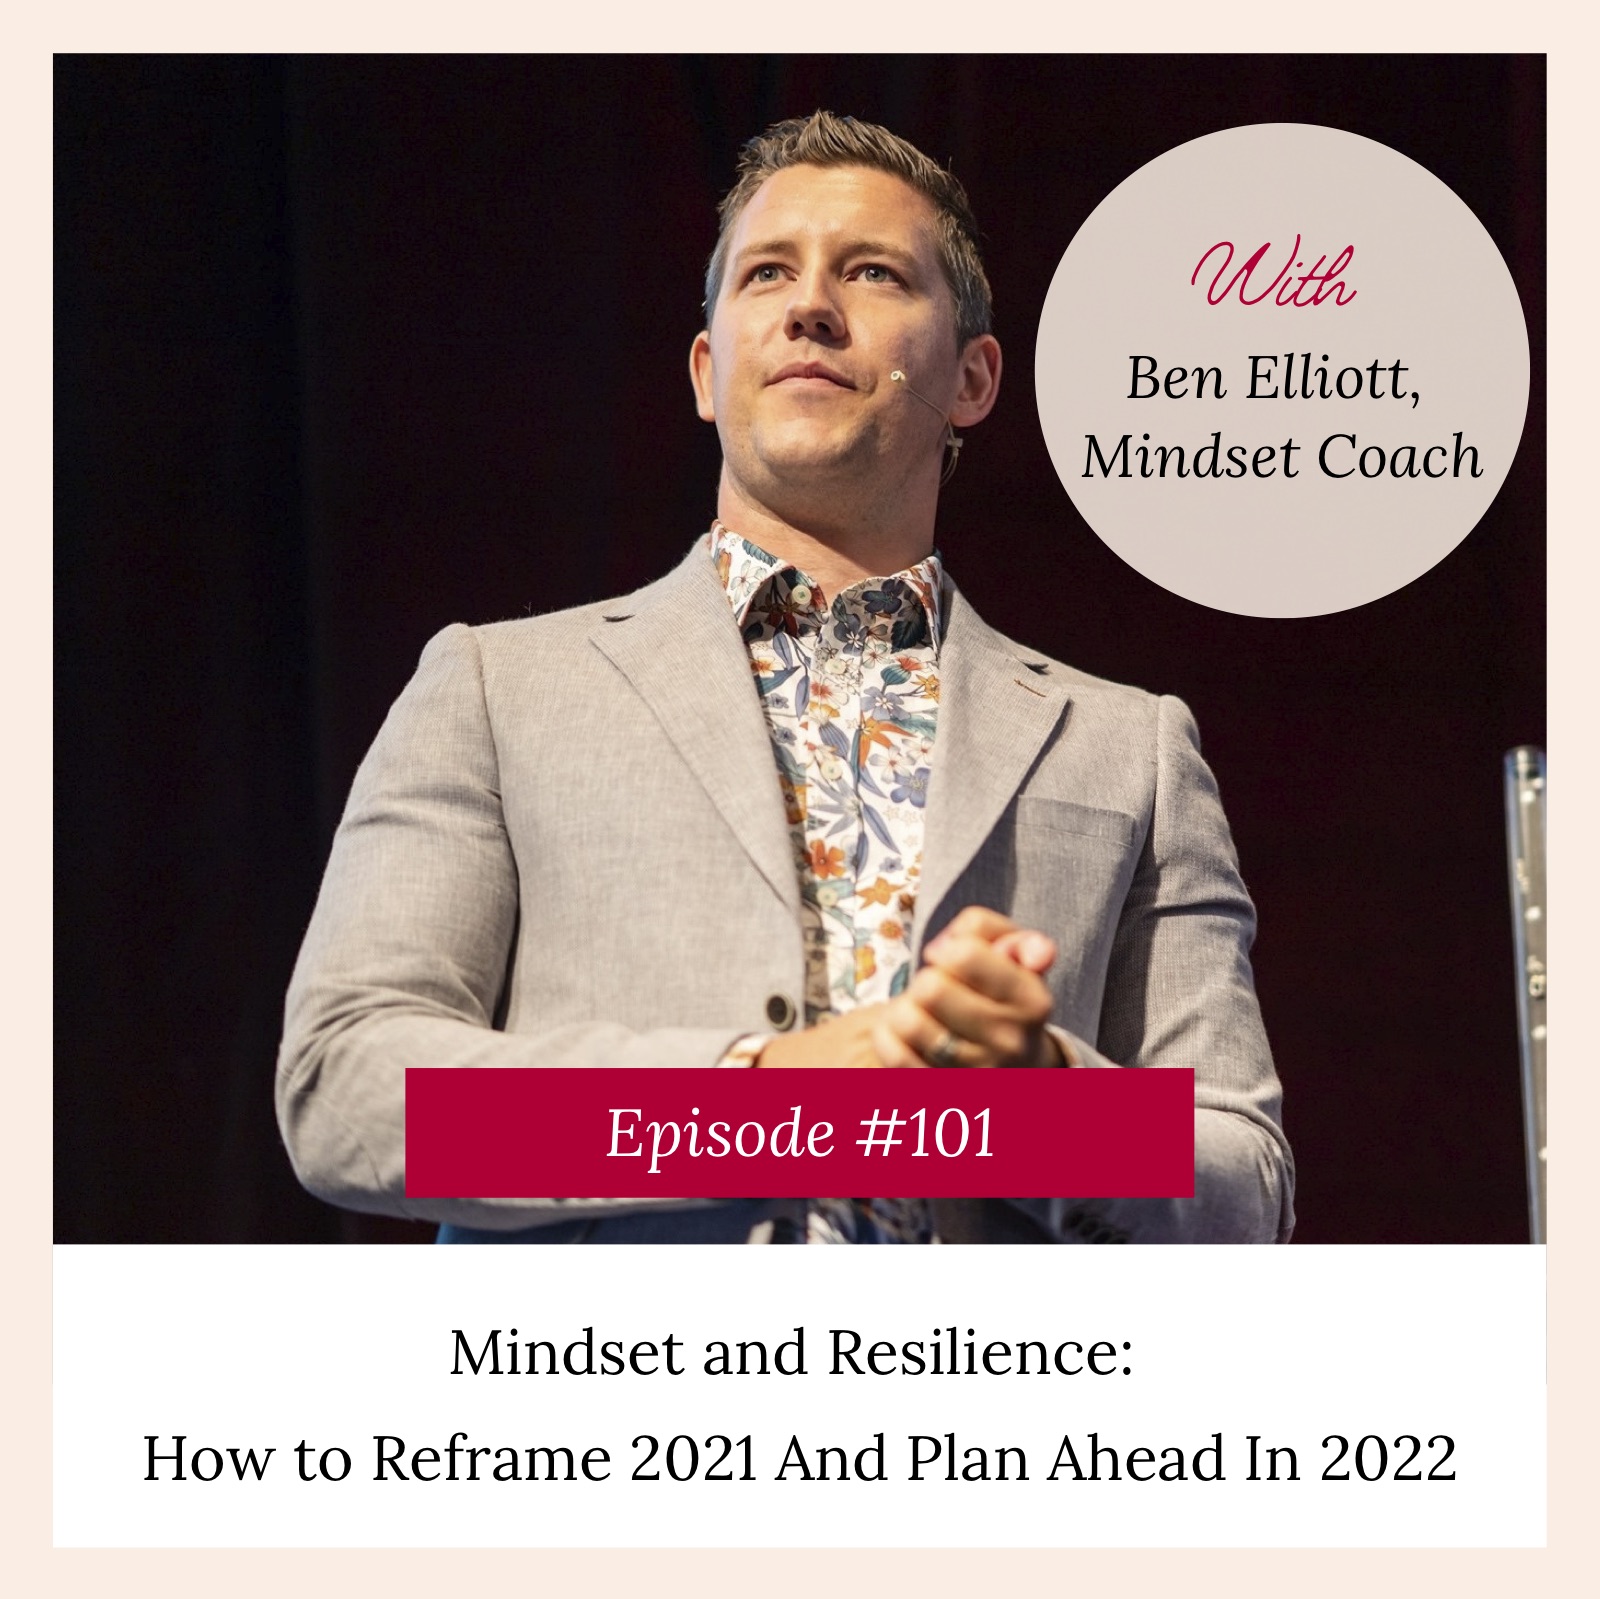 How to get mindset ready for 2022